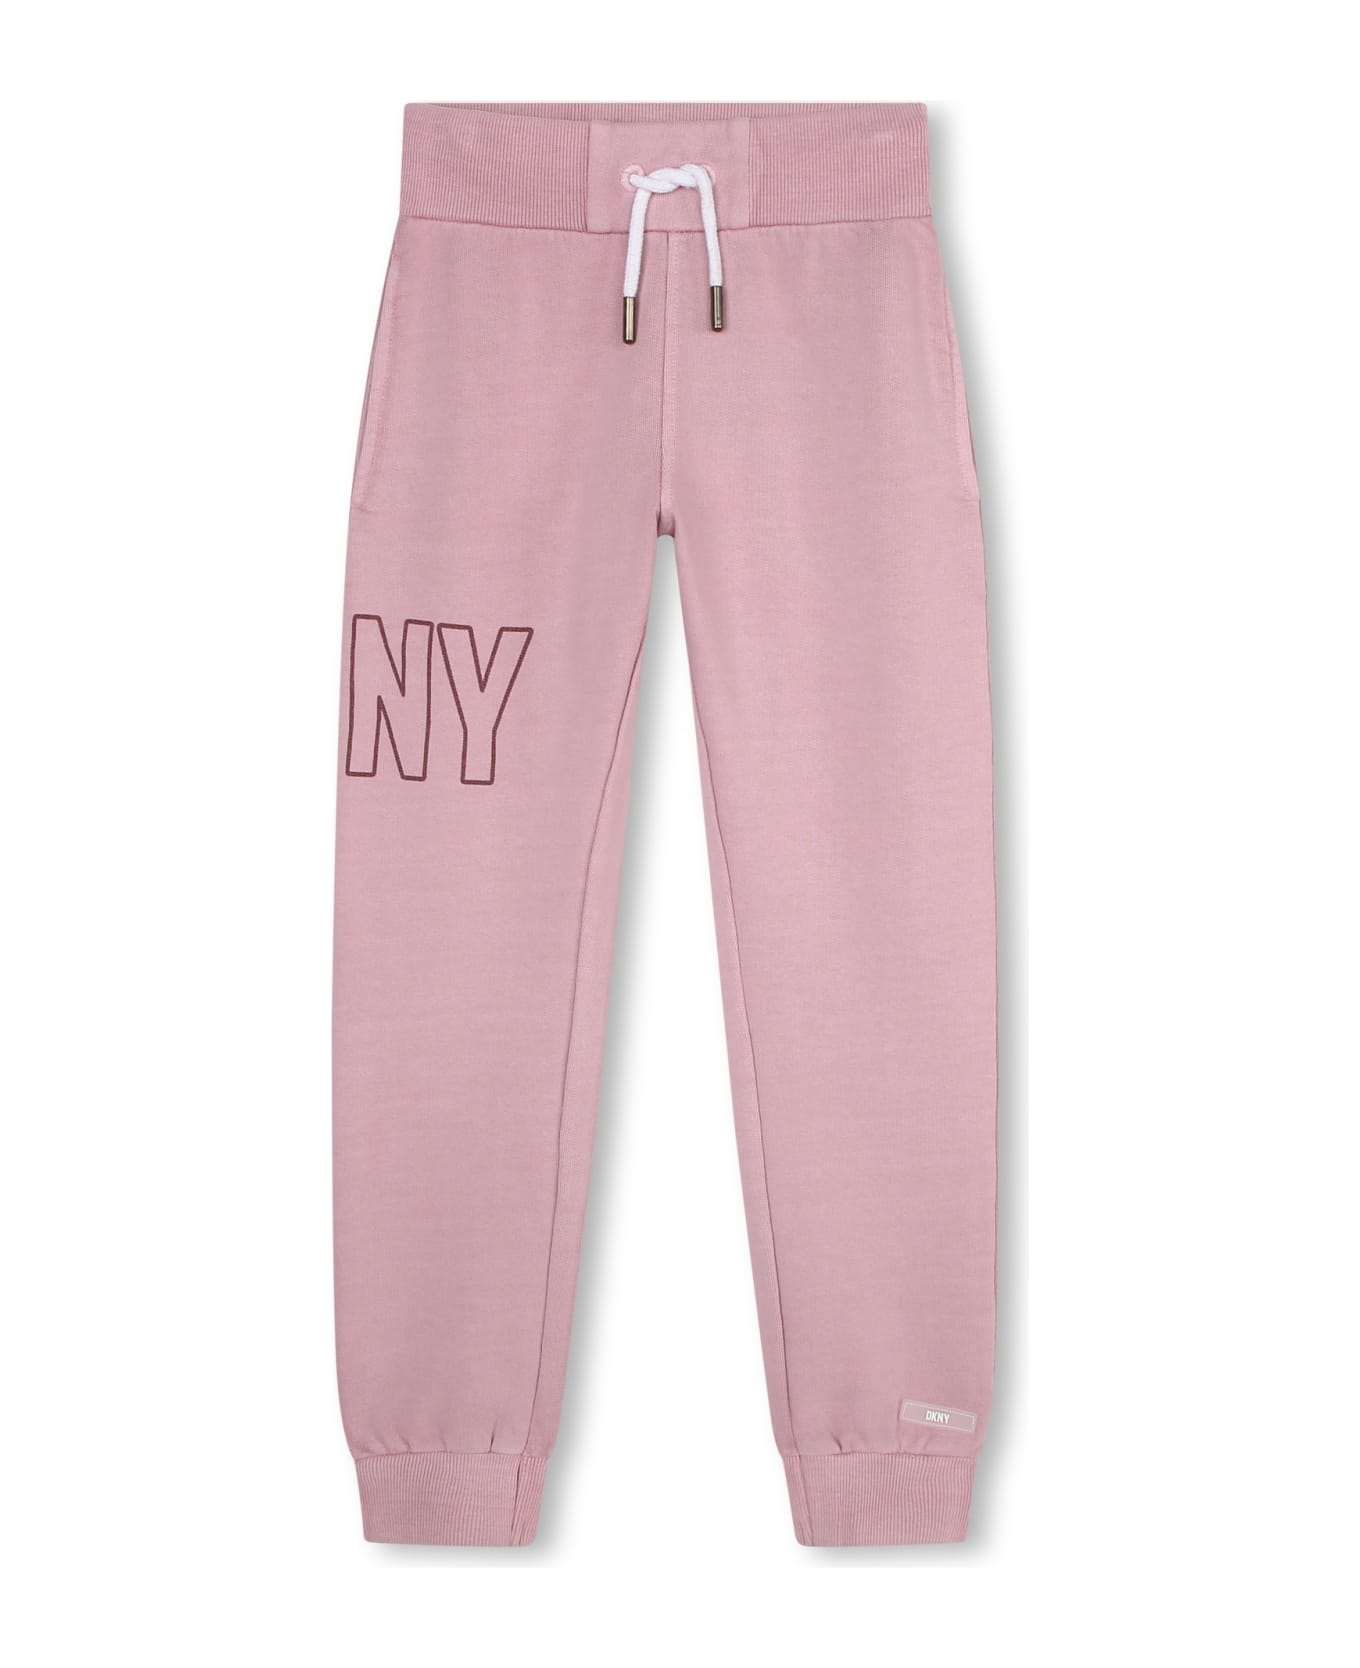 DKNY Sweatpants With Print - Pink